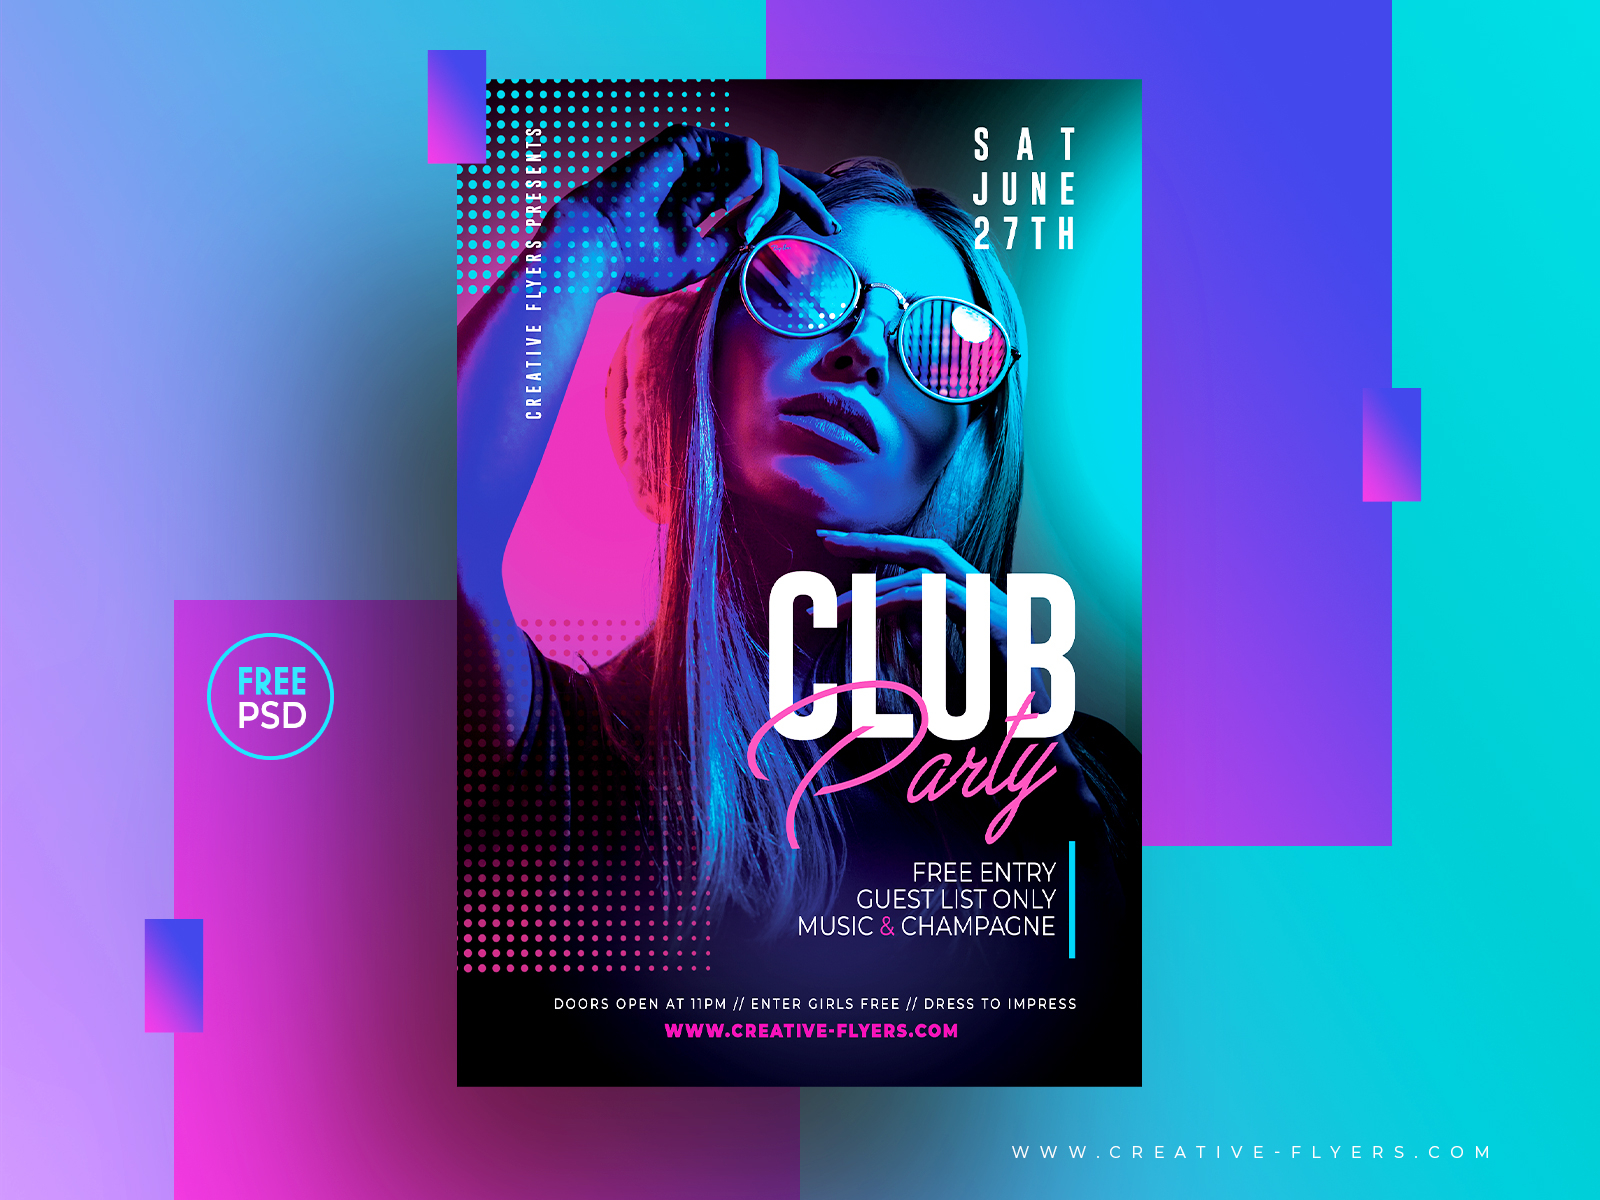 Download Free Psd Flyer Template By Rome Creation On Dribbble PSD Mockup Templates